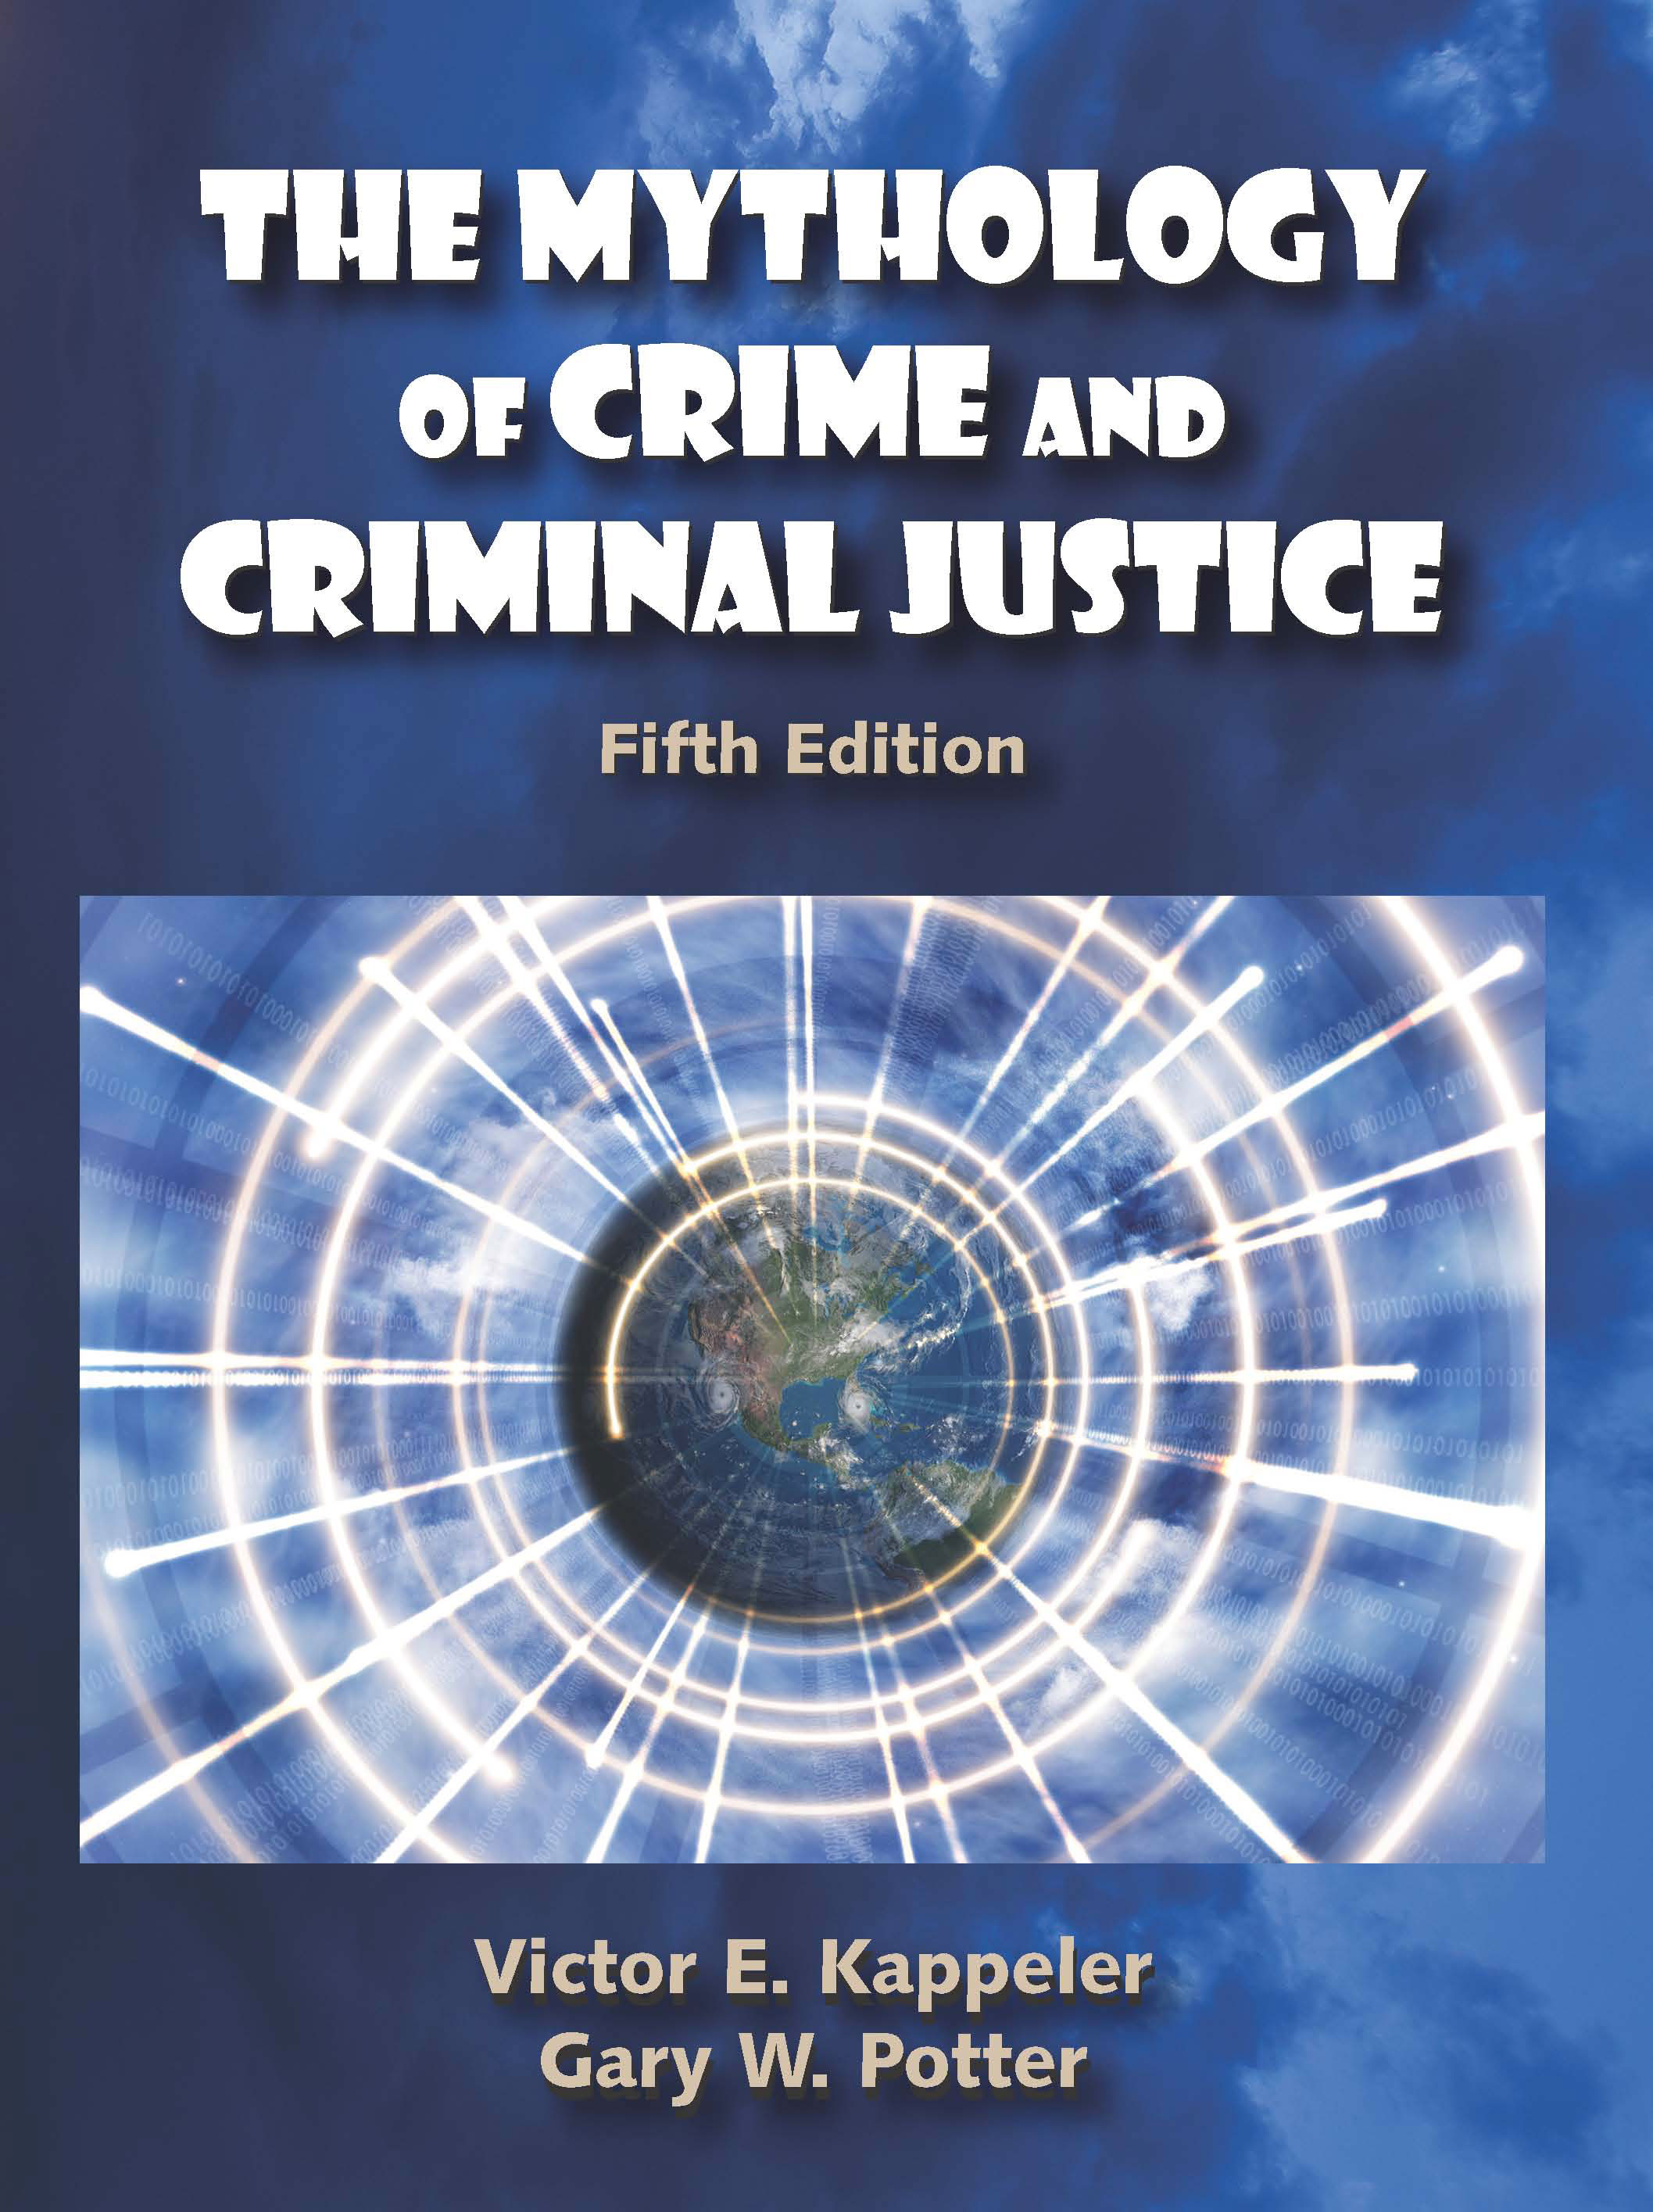 The Mythology of Crime and Criminal Justice: Fifth Edition by Victor E. Kappeler, Gary W. Potter